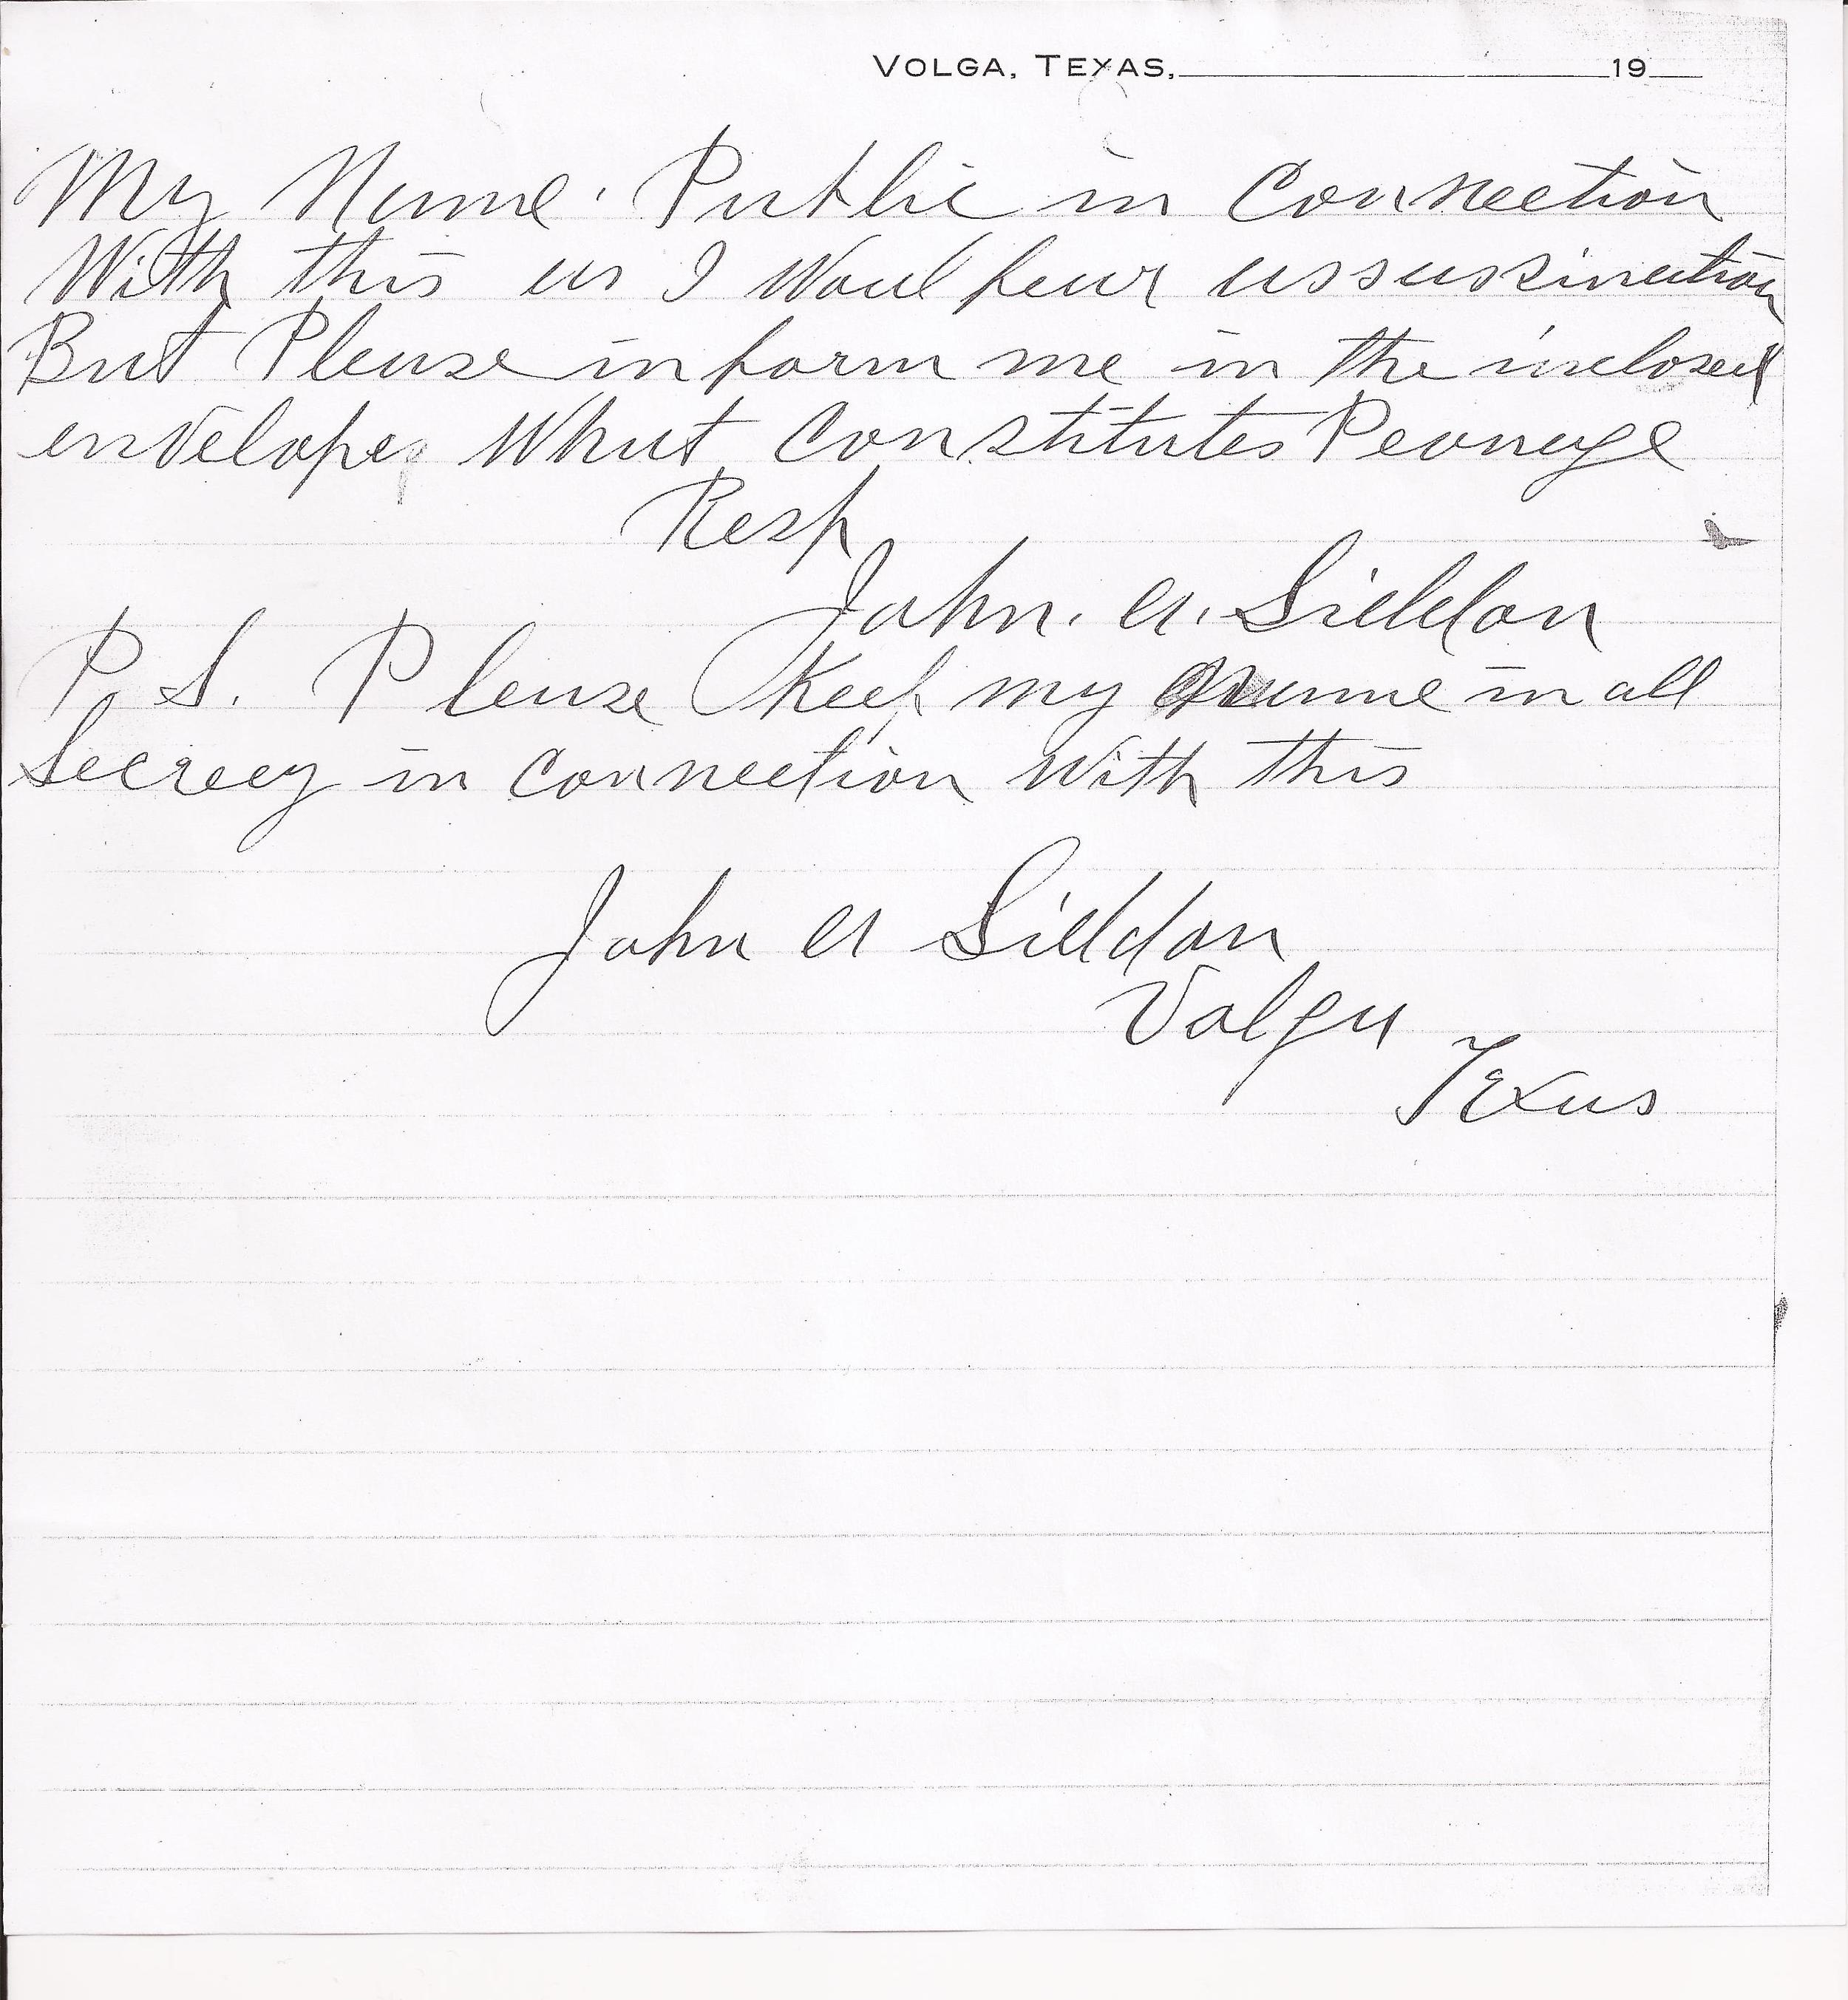  John A. Siddon to Cecil A. Lyon, August 1, 1910 (Page 3)&nbsp;(United States Department of Justice, file no. 152961, R.G. 60, 1910) 